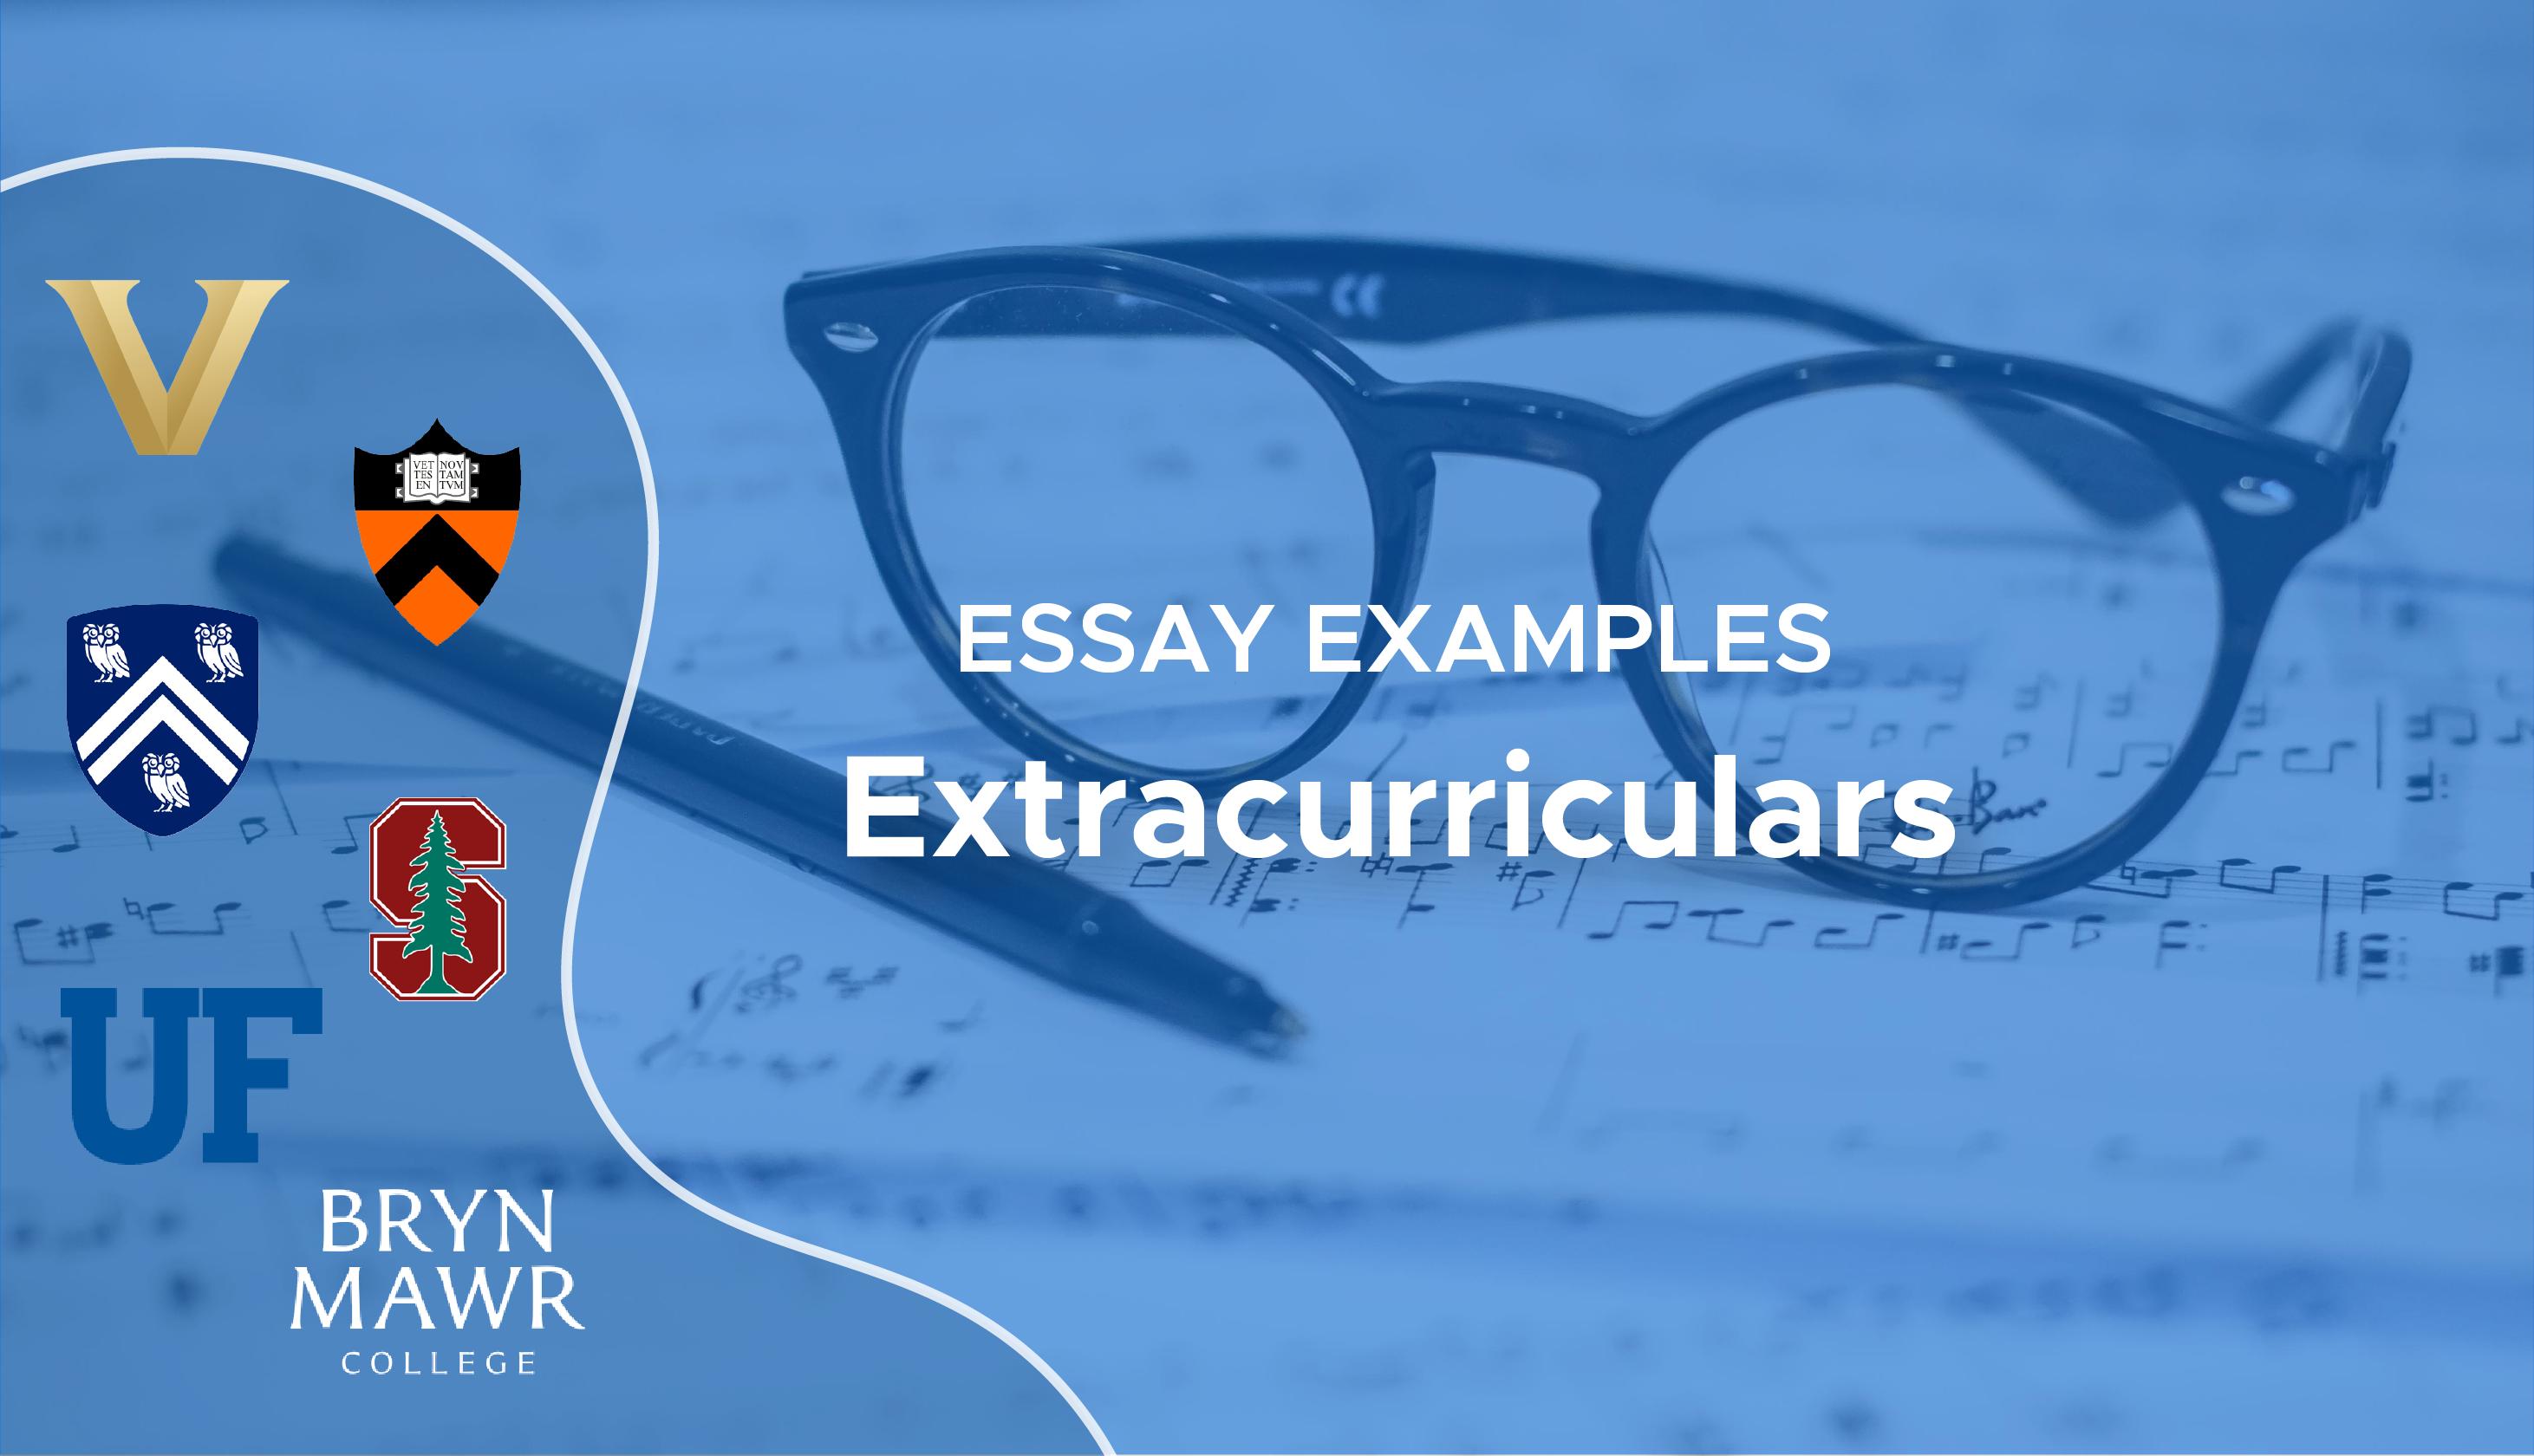 titles for essays about extracurricular activities